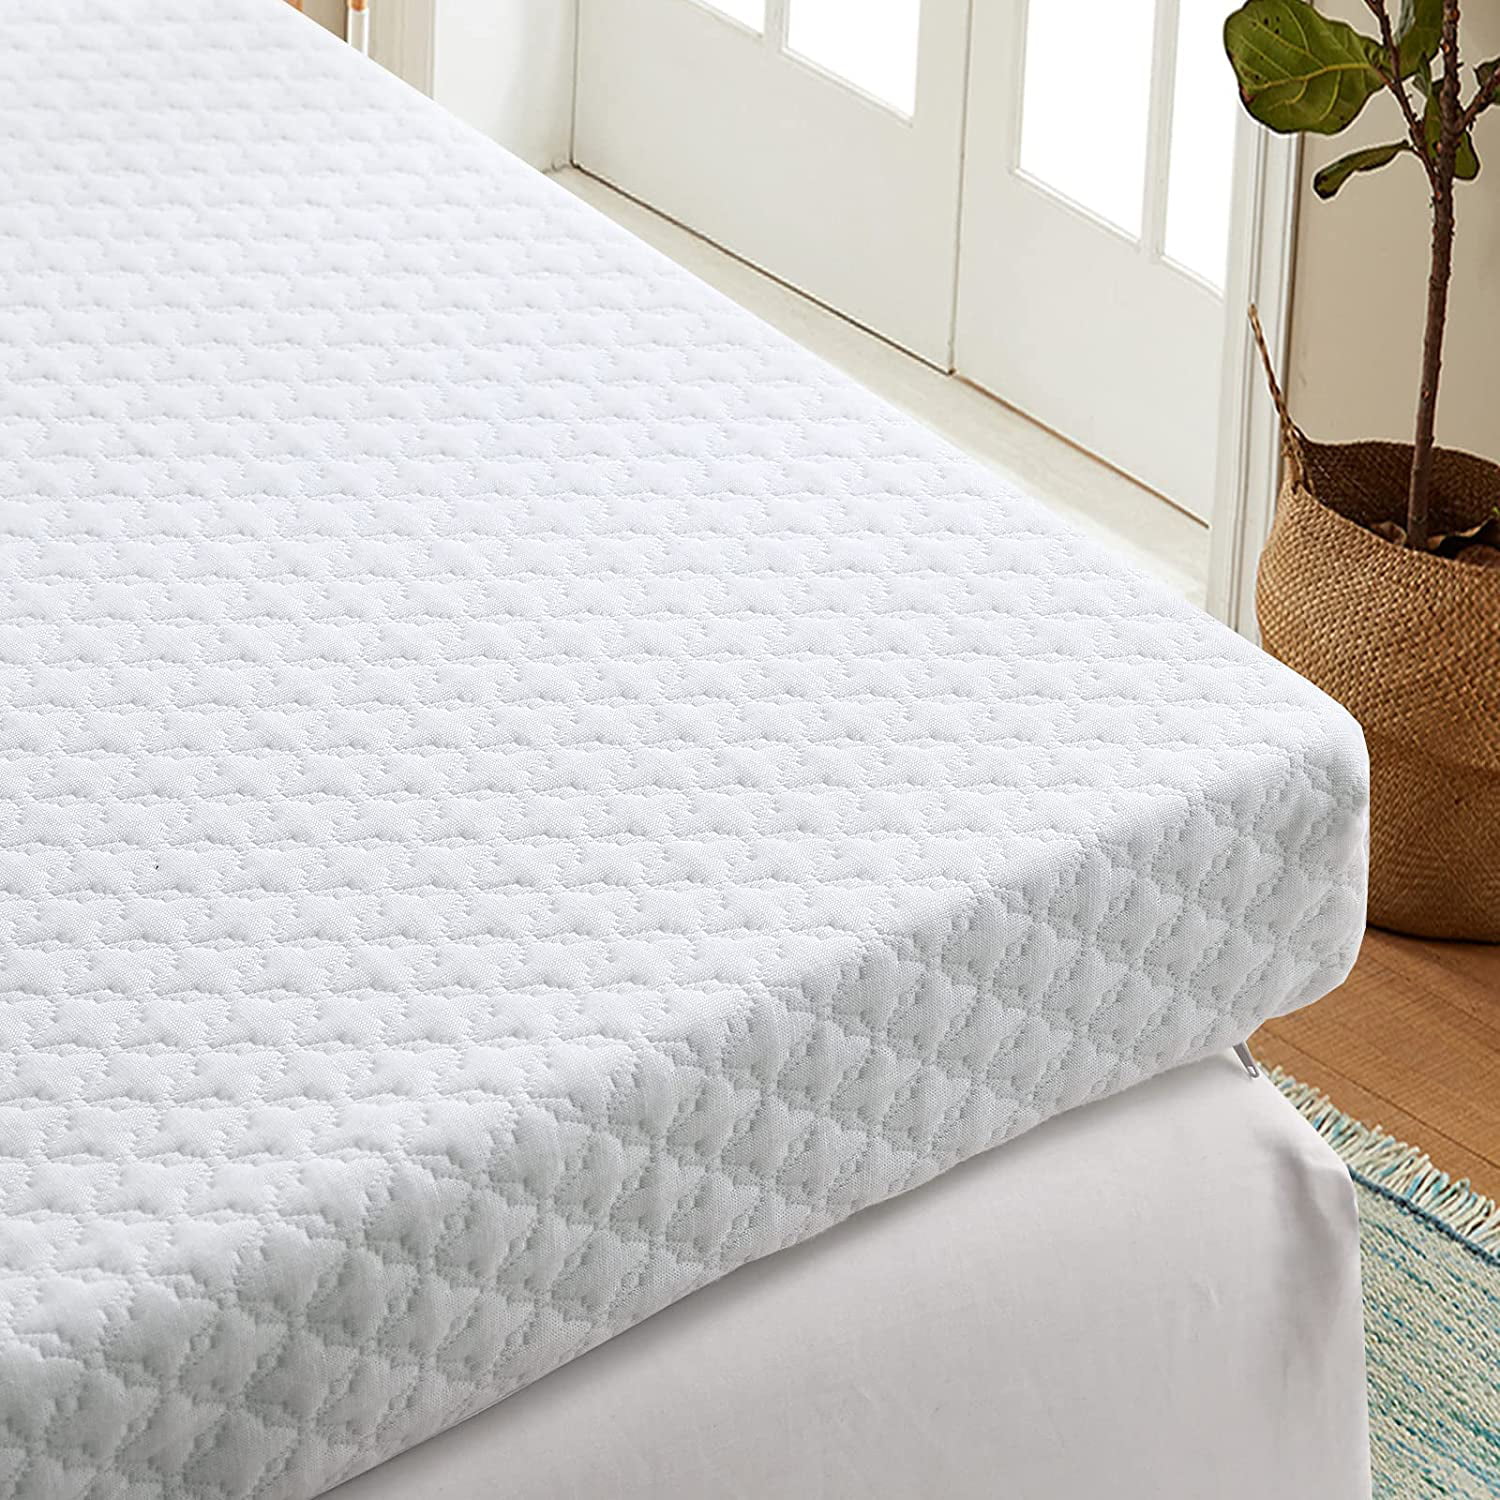 100 % Orthopeadic Memory Foam Mattress Topper Available in 1",2",3",4",5” and 6” 